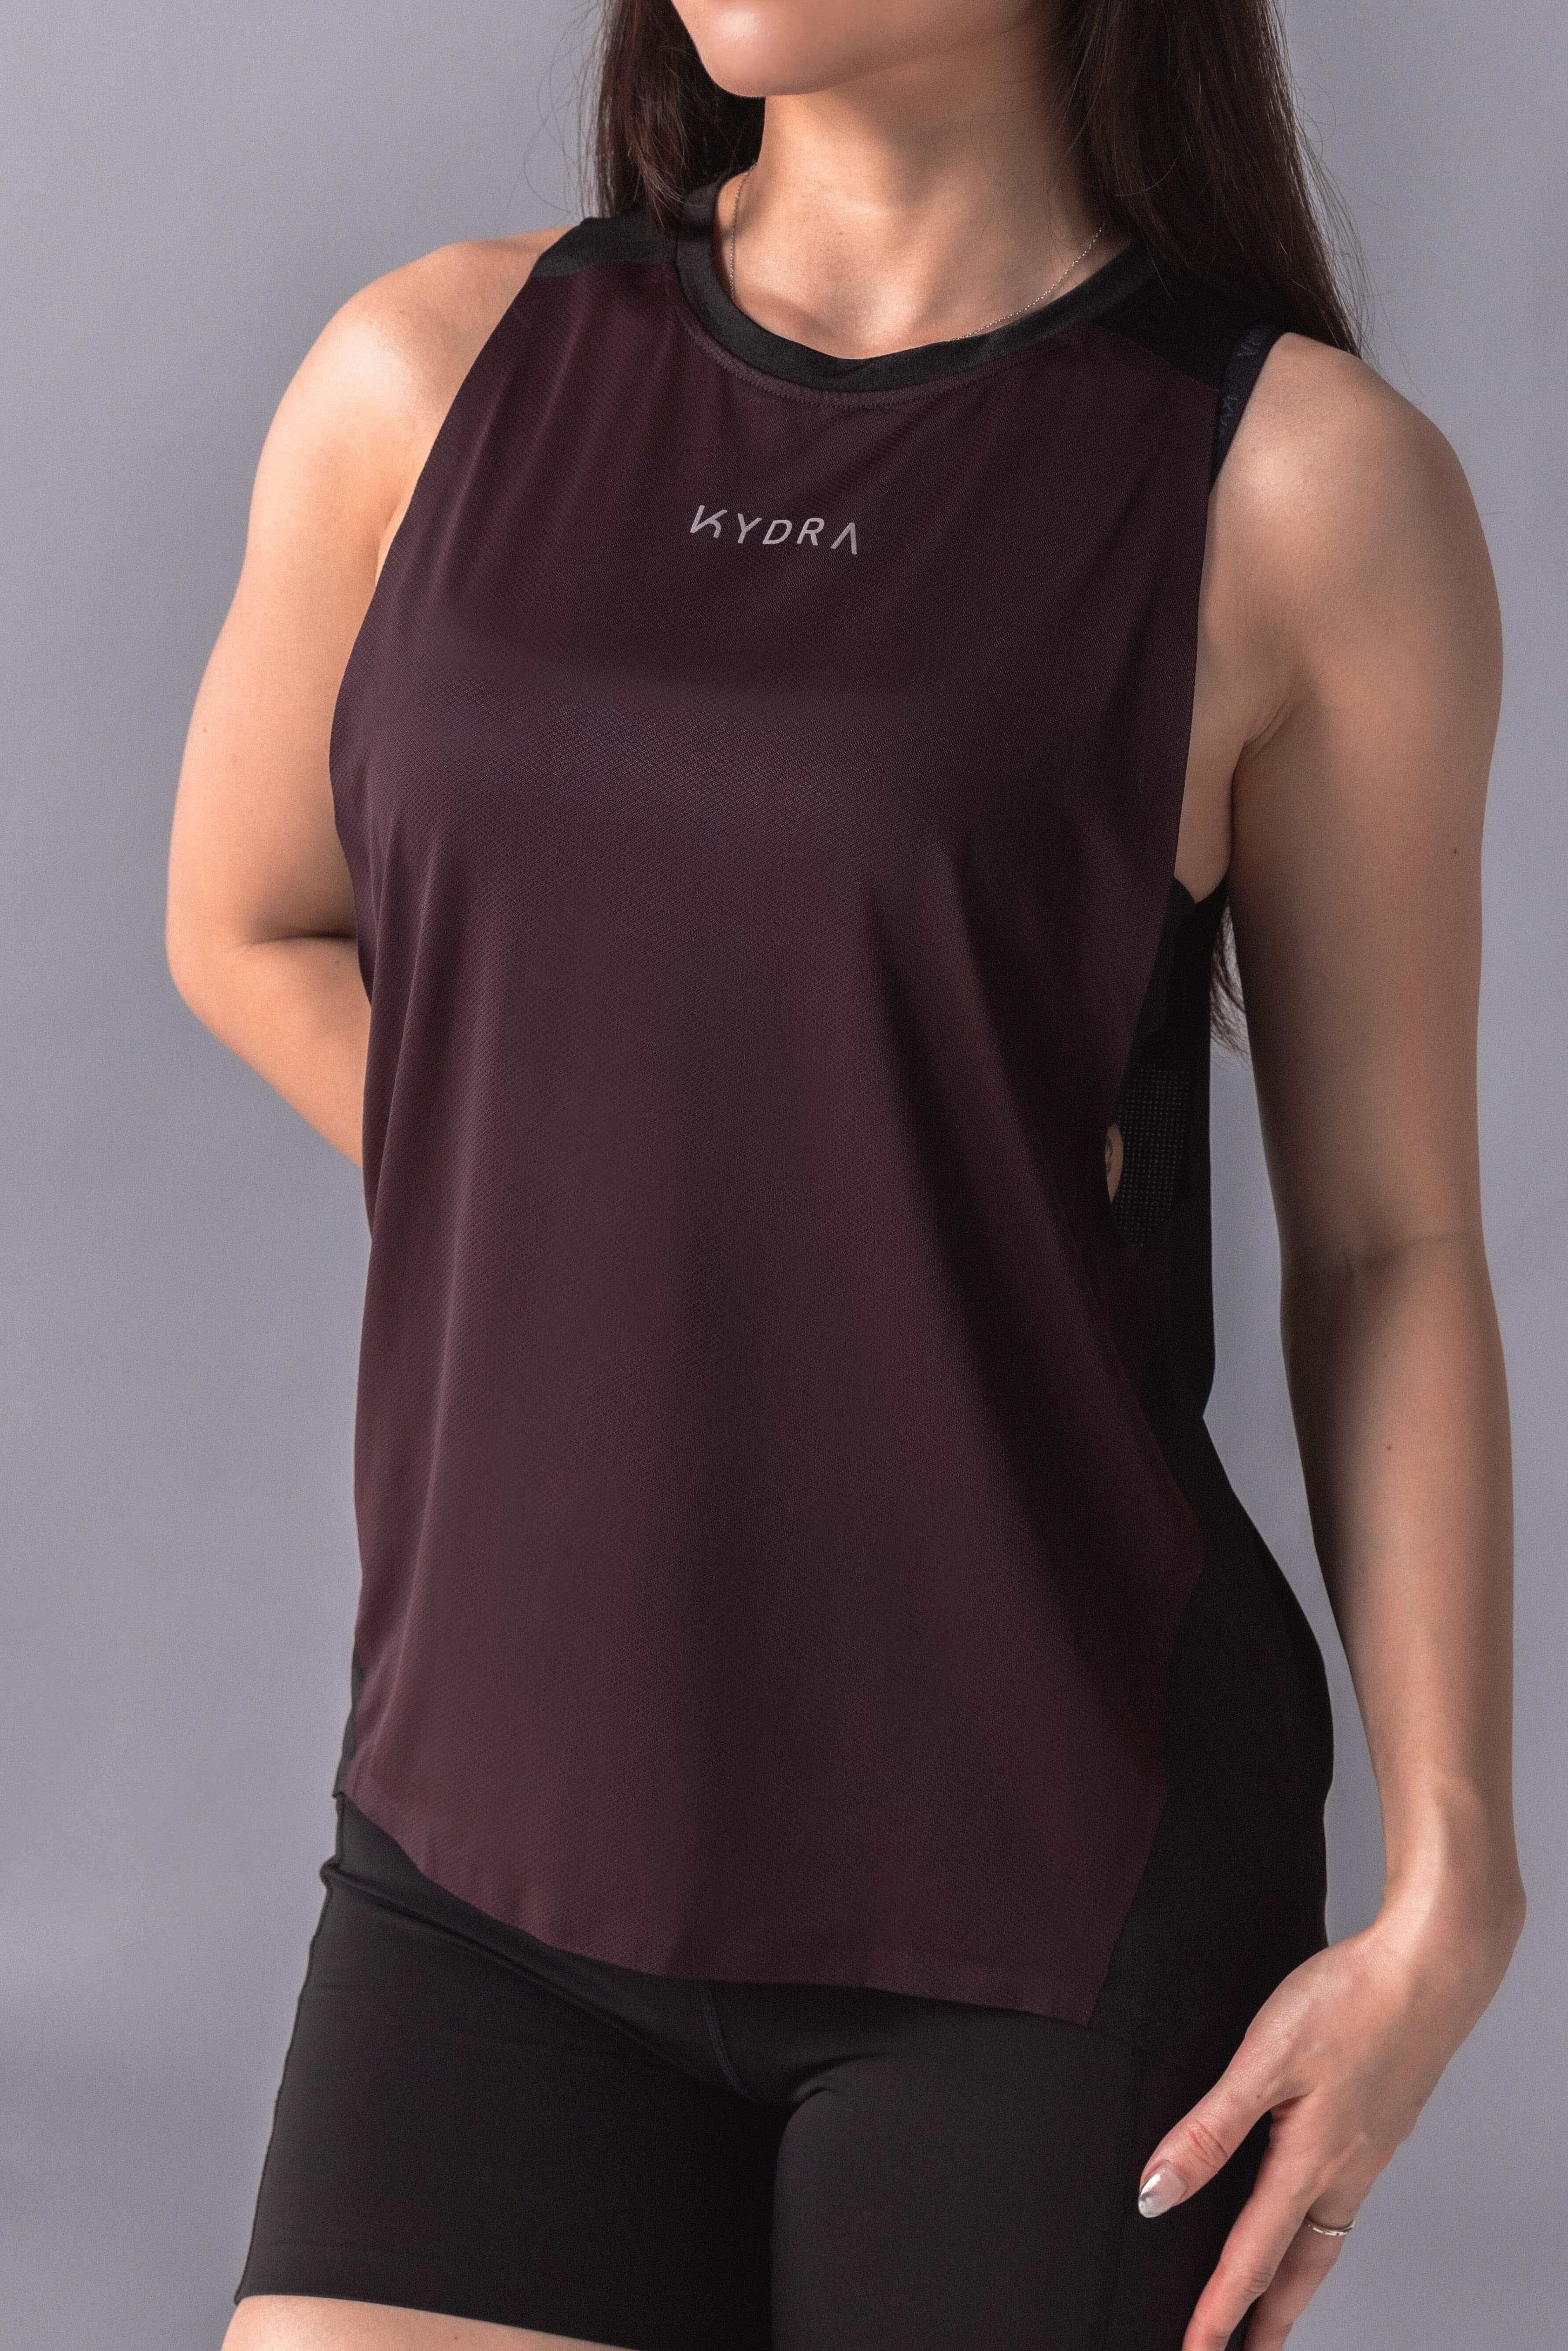 Kinetic Tank | KYDRA Activewear Singapore | Best Breathable Sports Top